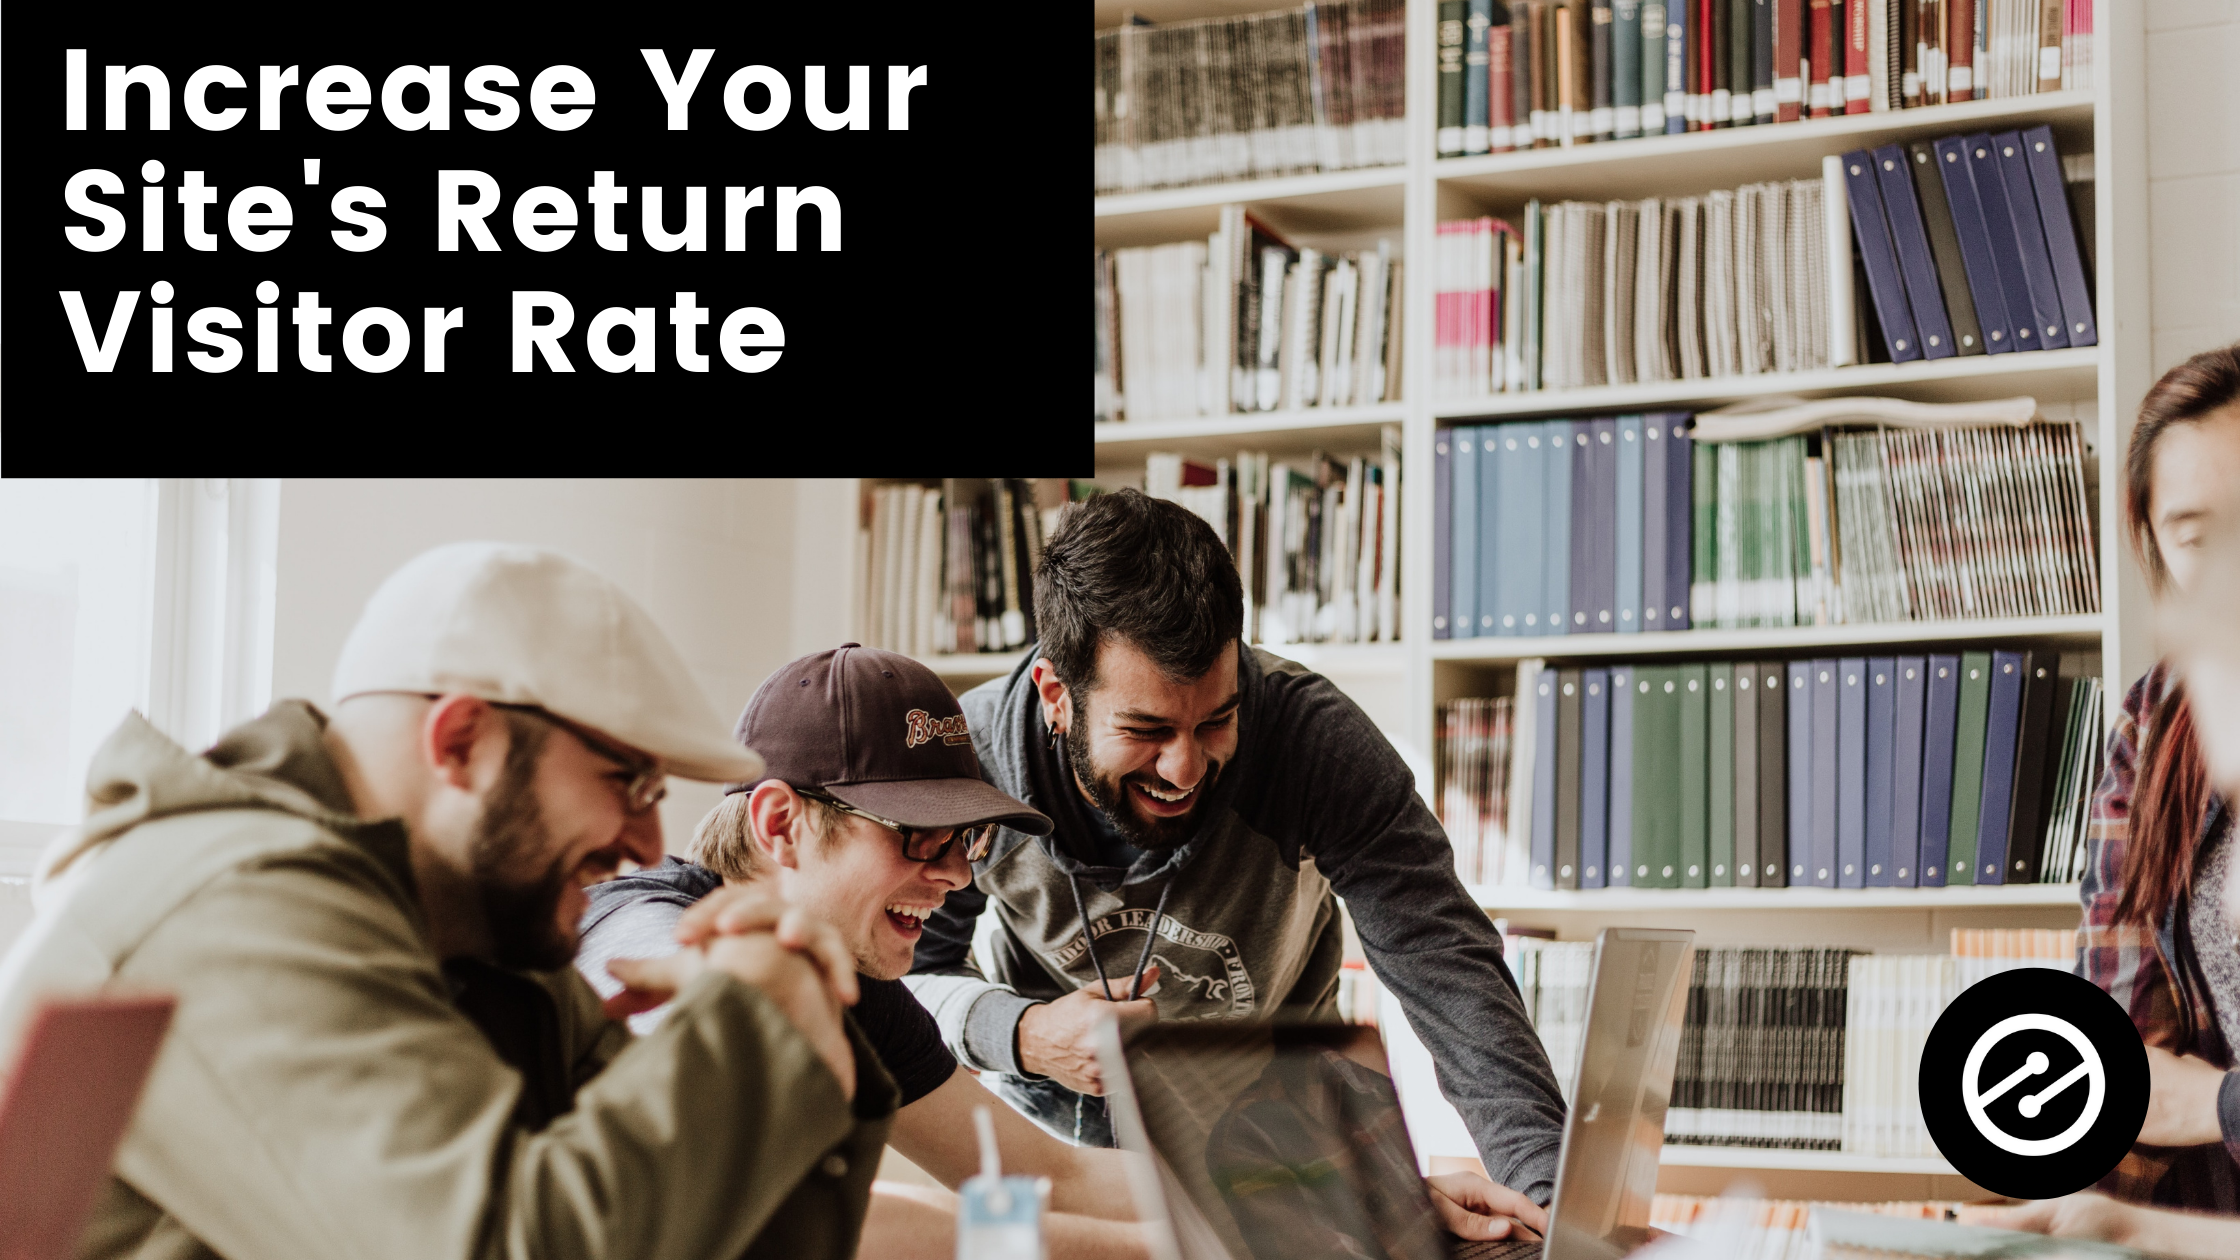 How to Increase Visitor Return Rate To Your Website